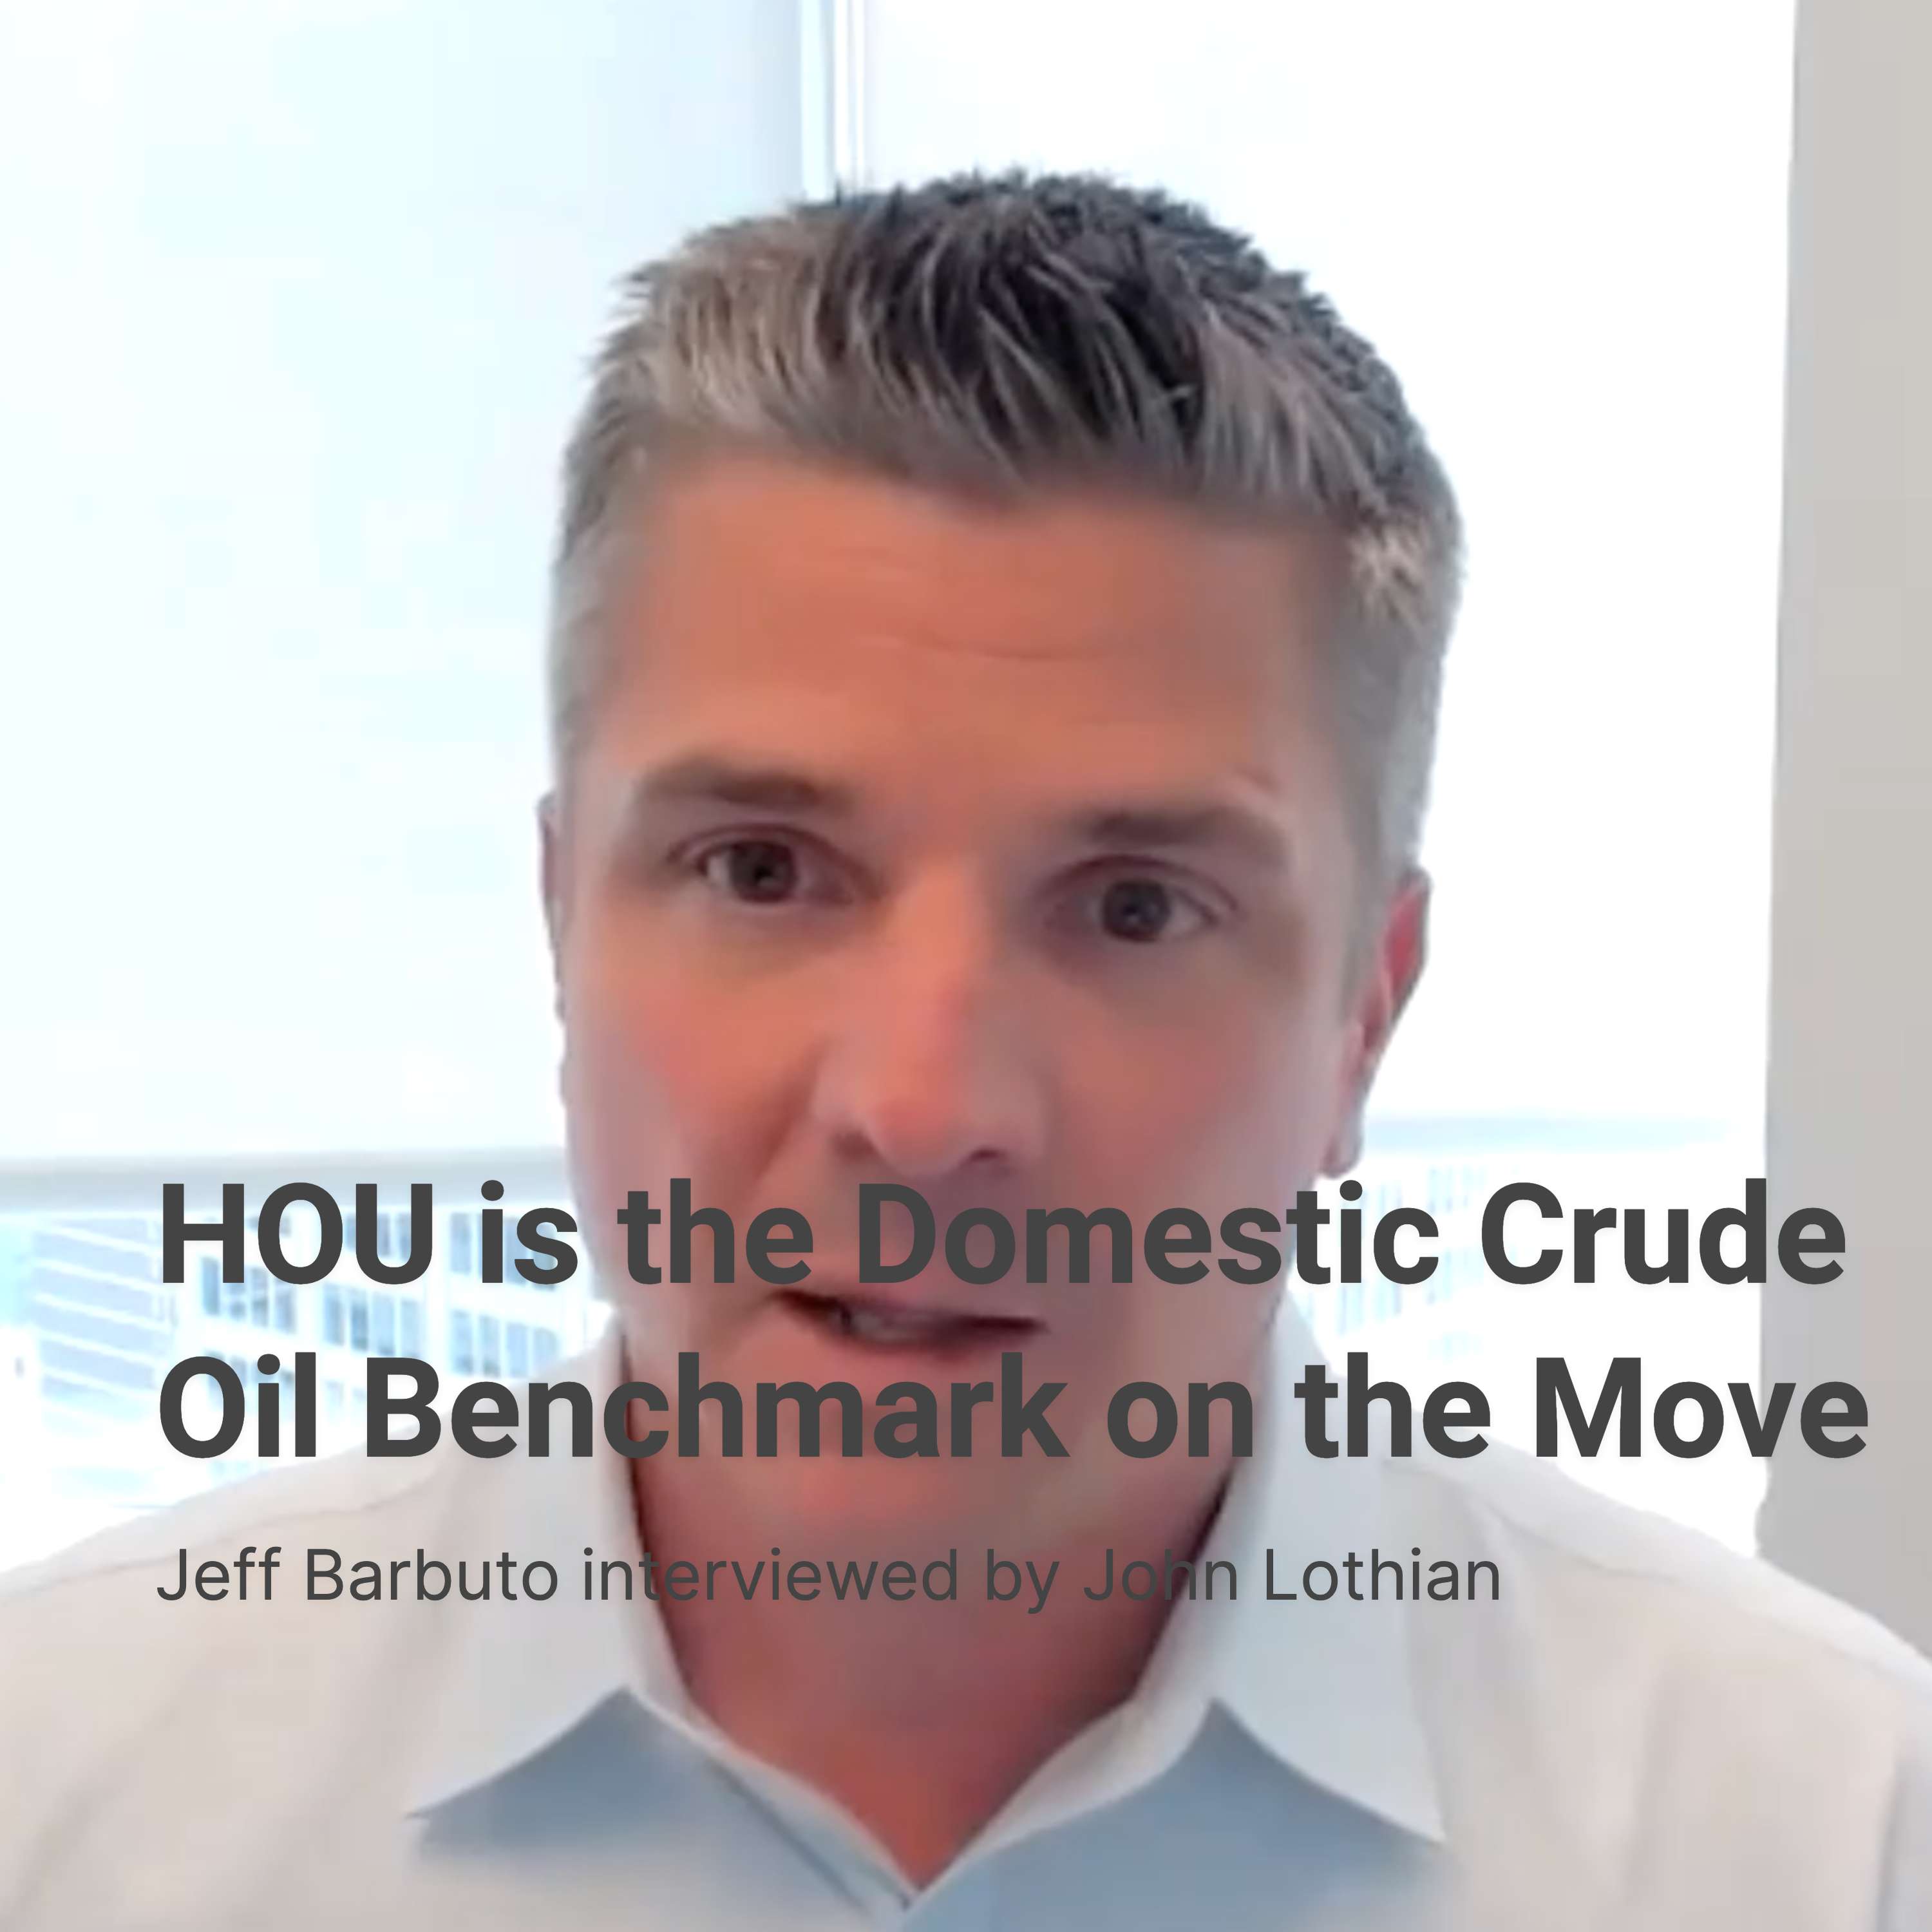 HOU is the Domestic Crude Oil Benchmark on the Move